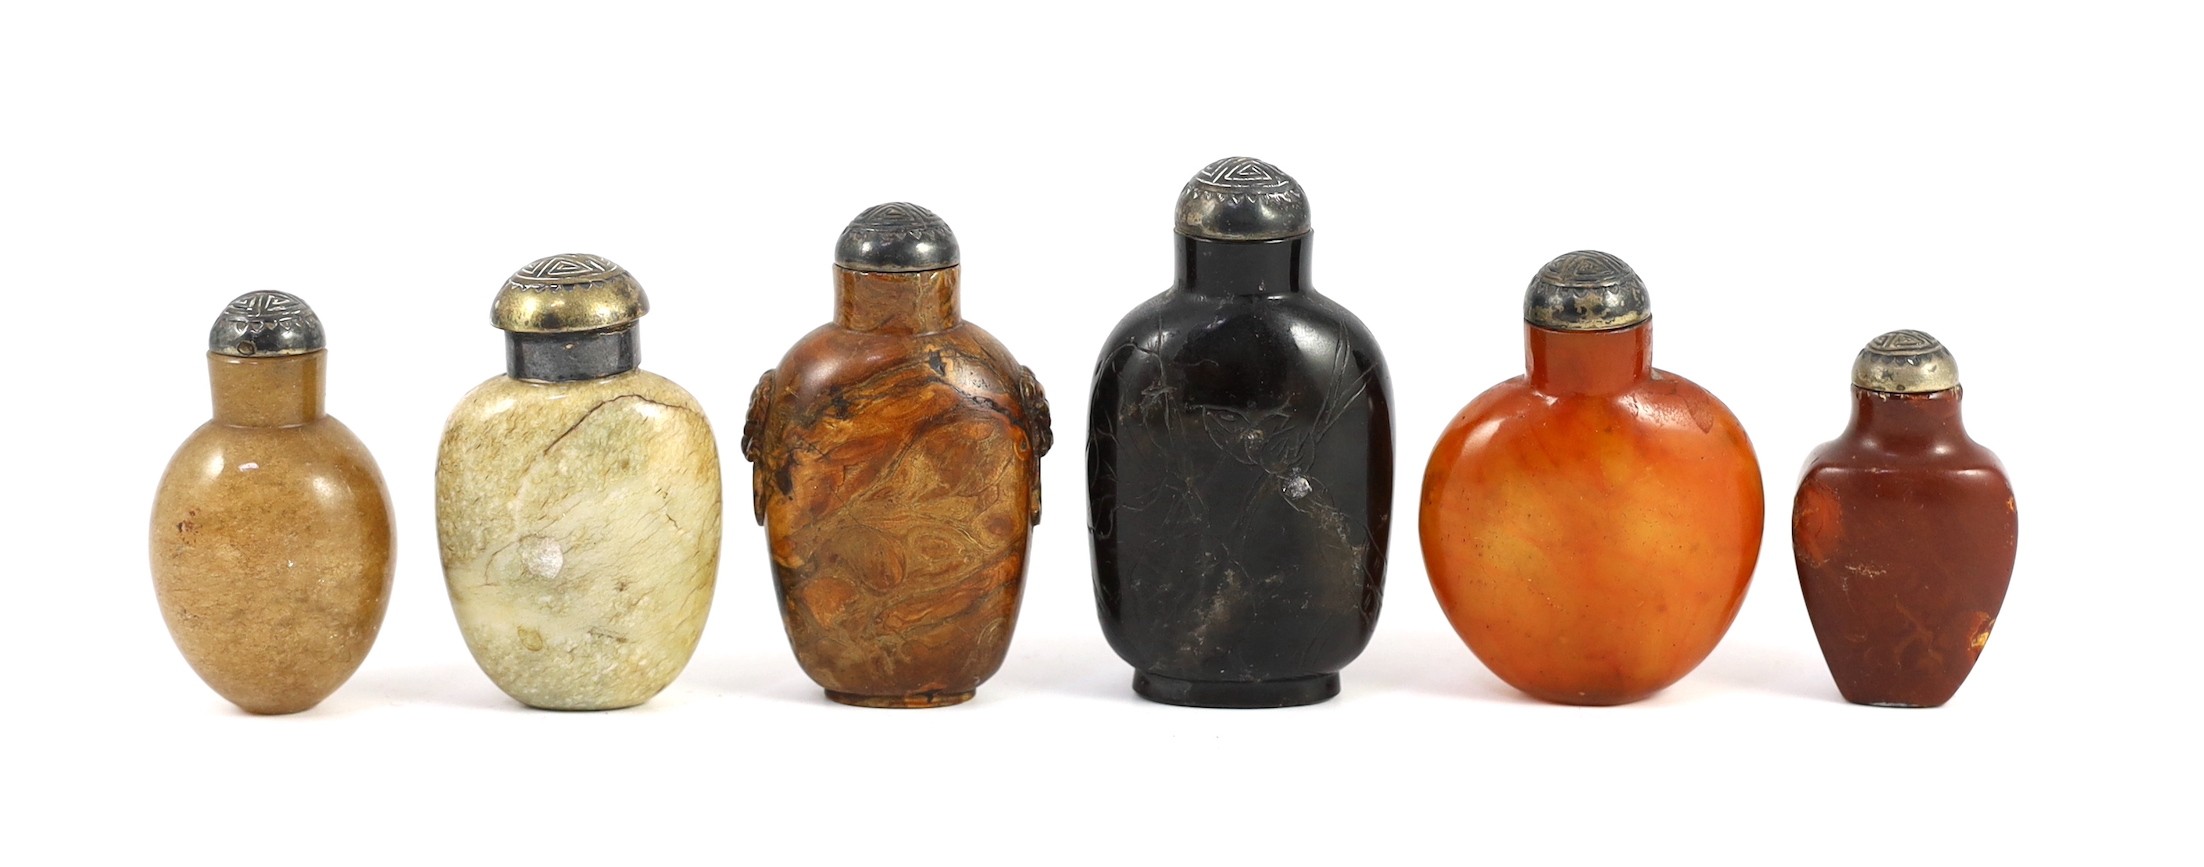 A scholarly collection of six 19th century Chinese snuff bottles, some faults